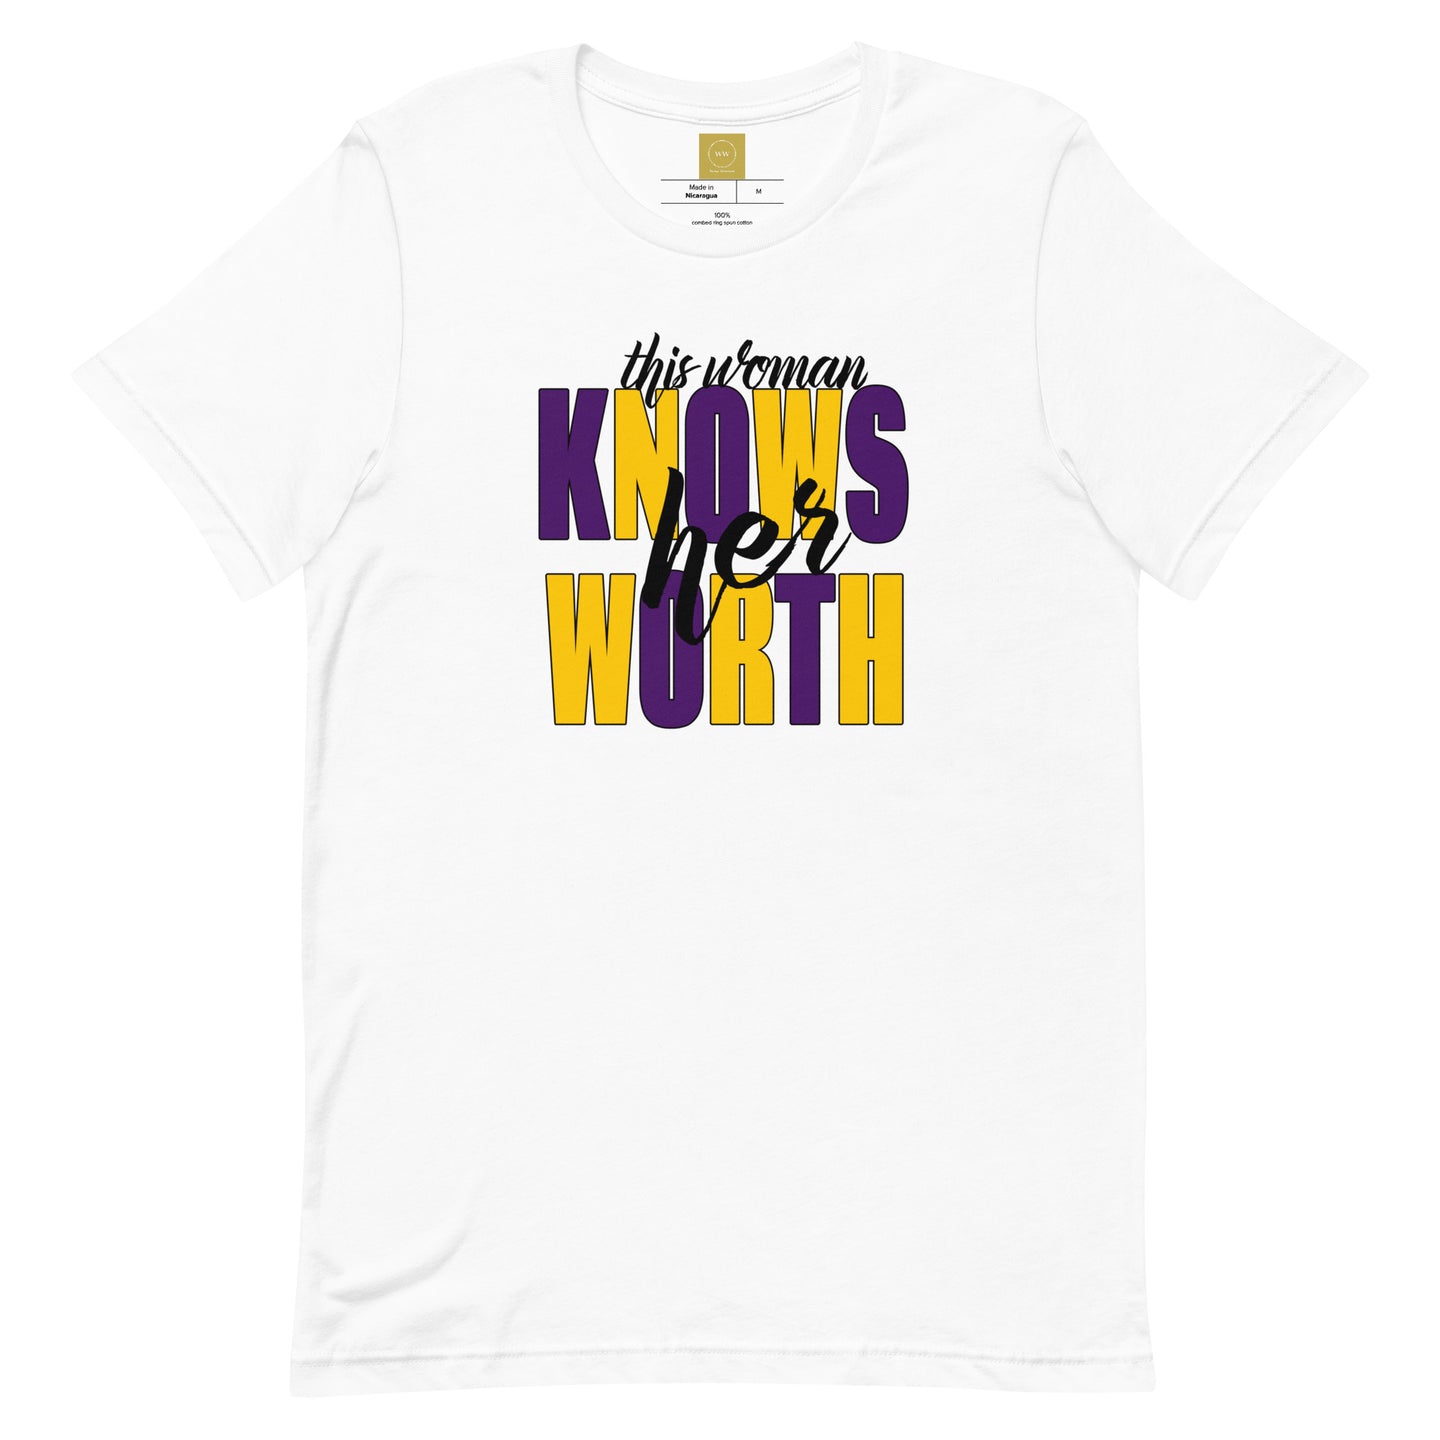 The Woman Knows Her Worth| Unisex t-shirt